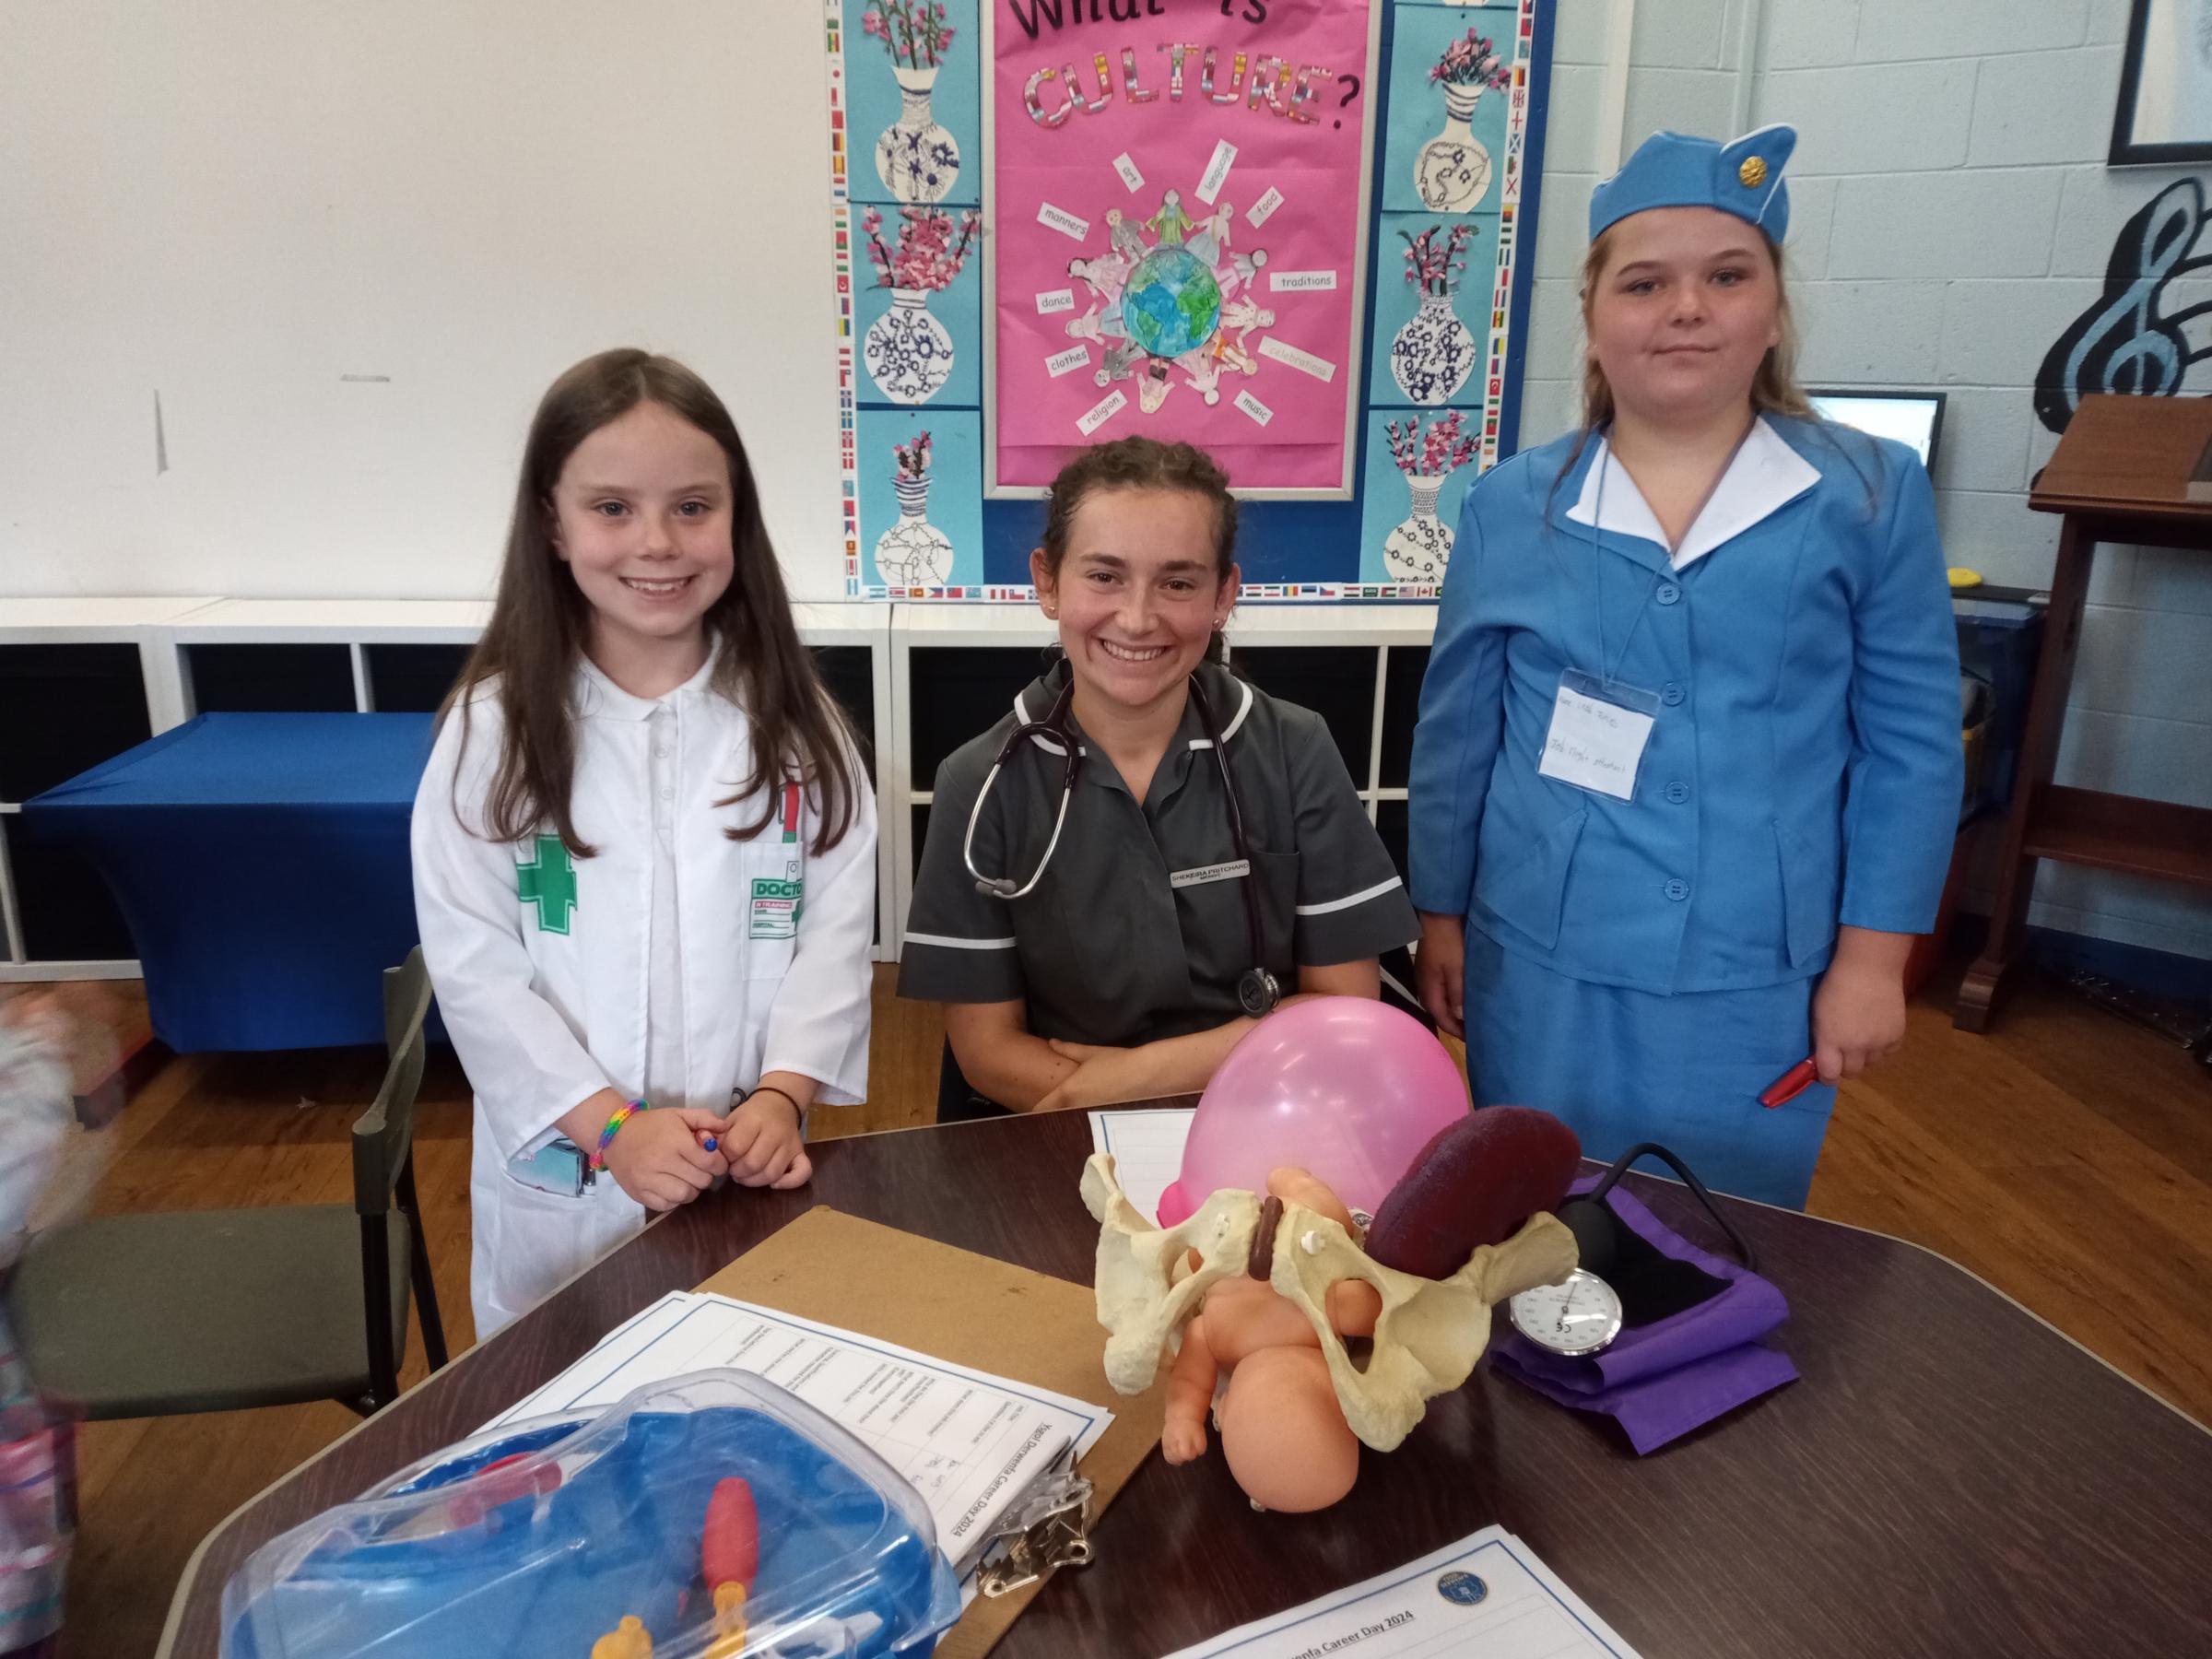 Careers day at Ysgol Derwenfa - midwife and former pupil Shekeira Pritchard.